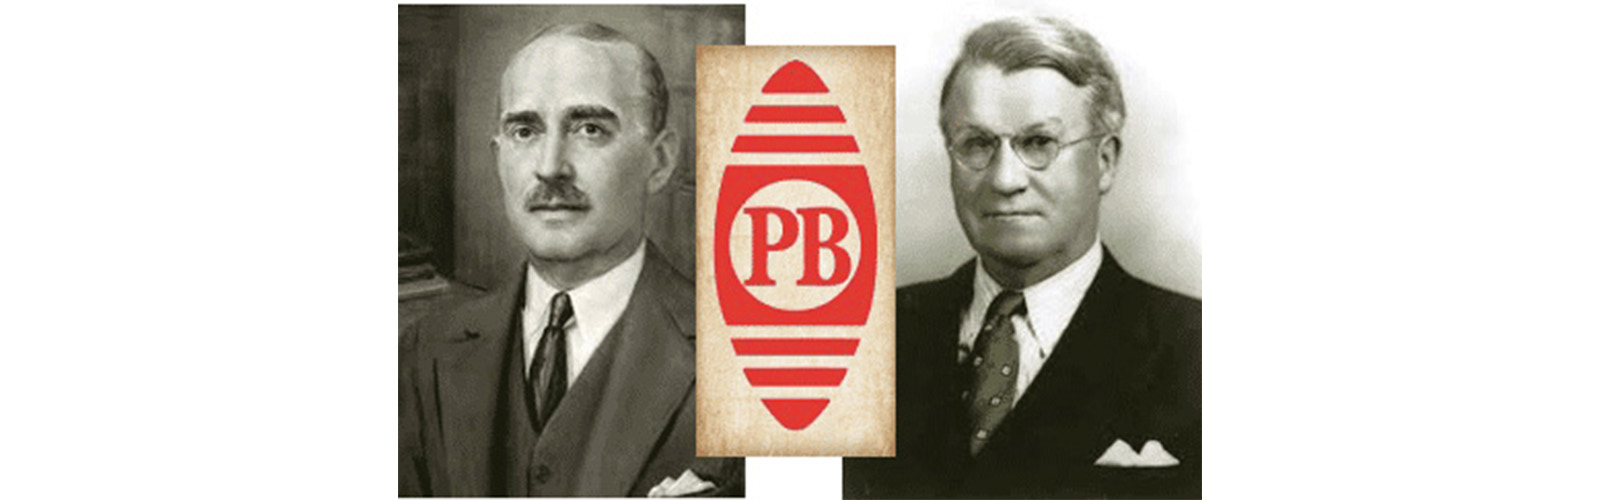 Arthur Pitney (L) and Walter Bowes (R)